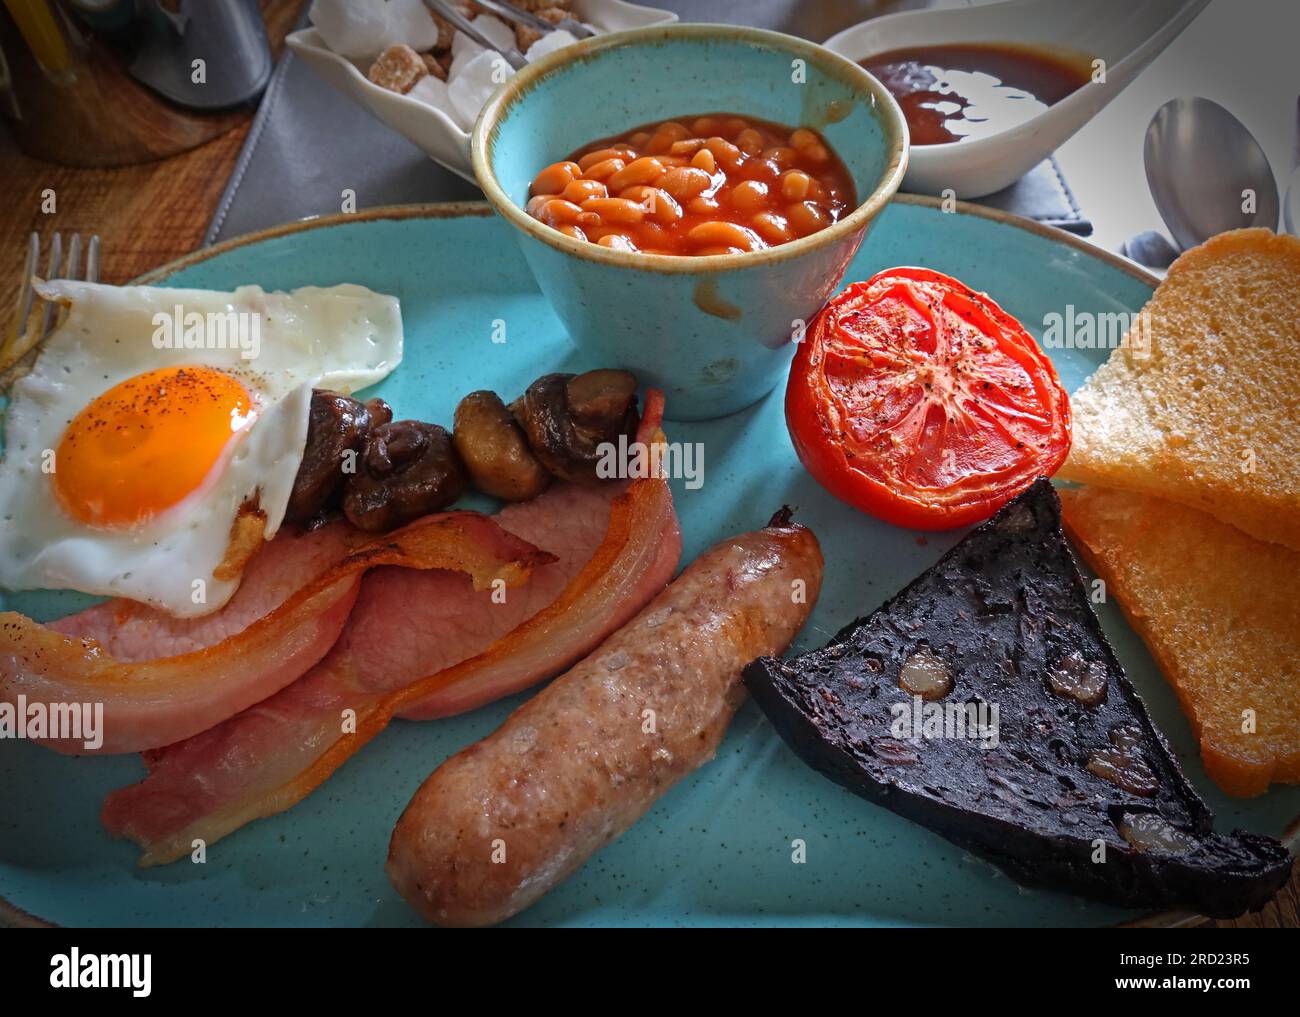 British traditional cooked breakfast, fried egg, bacon, sausage, black pudding, fried bread, beans, grilled tomato and mushrooms Stock Photo